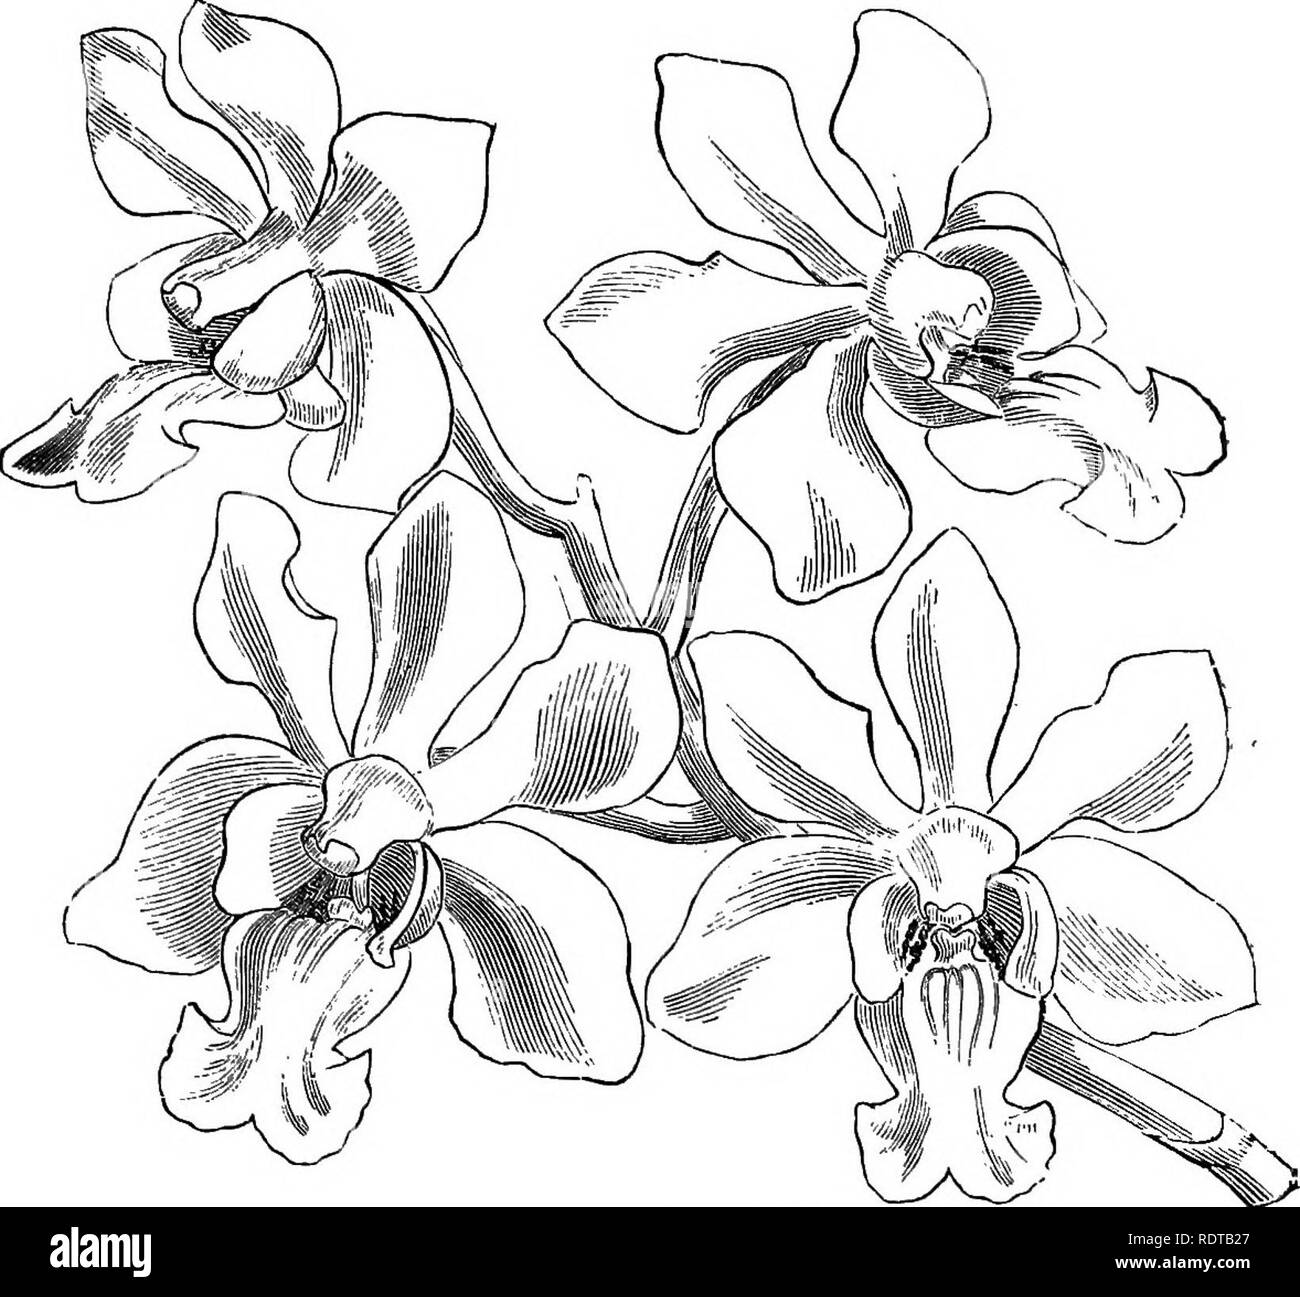 . The orchid-grower's manual, containing descriptions of the best species and varieties of orchidaceous plants in cultivation ... Orchids. VANDA. 743 the apex, emarginate, with the lobes nearly equal. The racemes are axillary, about half the length of the leaves, bearing showy flowers 3 inches across, with oblong obovate blunt-ended sepals and petals of a rich golden-yellow freely and irregularly marked with rich cinnamon-brown blotches; and a white fleshy lip, which is small incurved channelled dolabriform, with short rounded basal auricles. It blooms in tlie spring months, and continues a lo Stock Photo